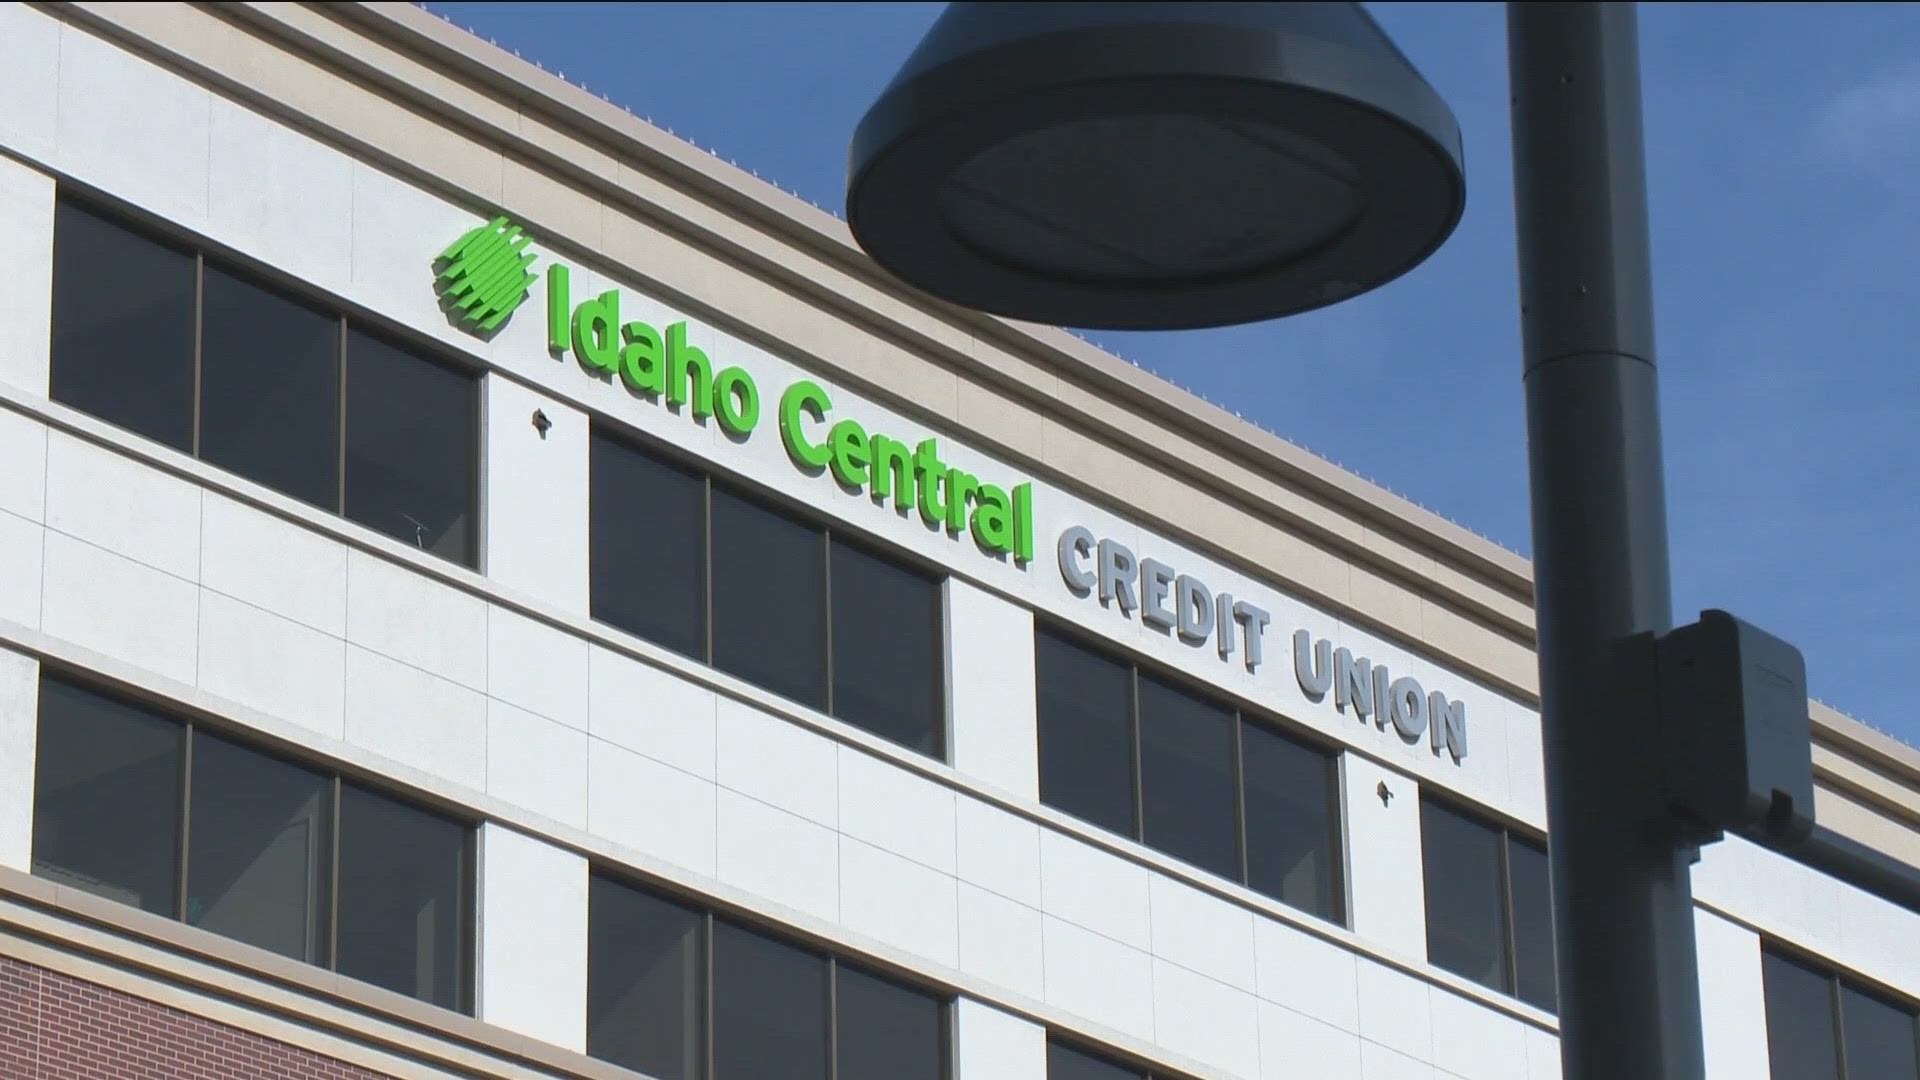 For KTVB's 16th annual 7Cares Idaho Shares campaign, Idaho Central Credit Union is showing support for Idahoans in need as a featured Company that Cares.